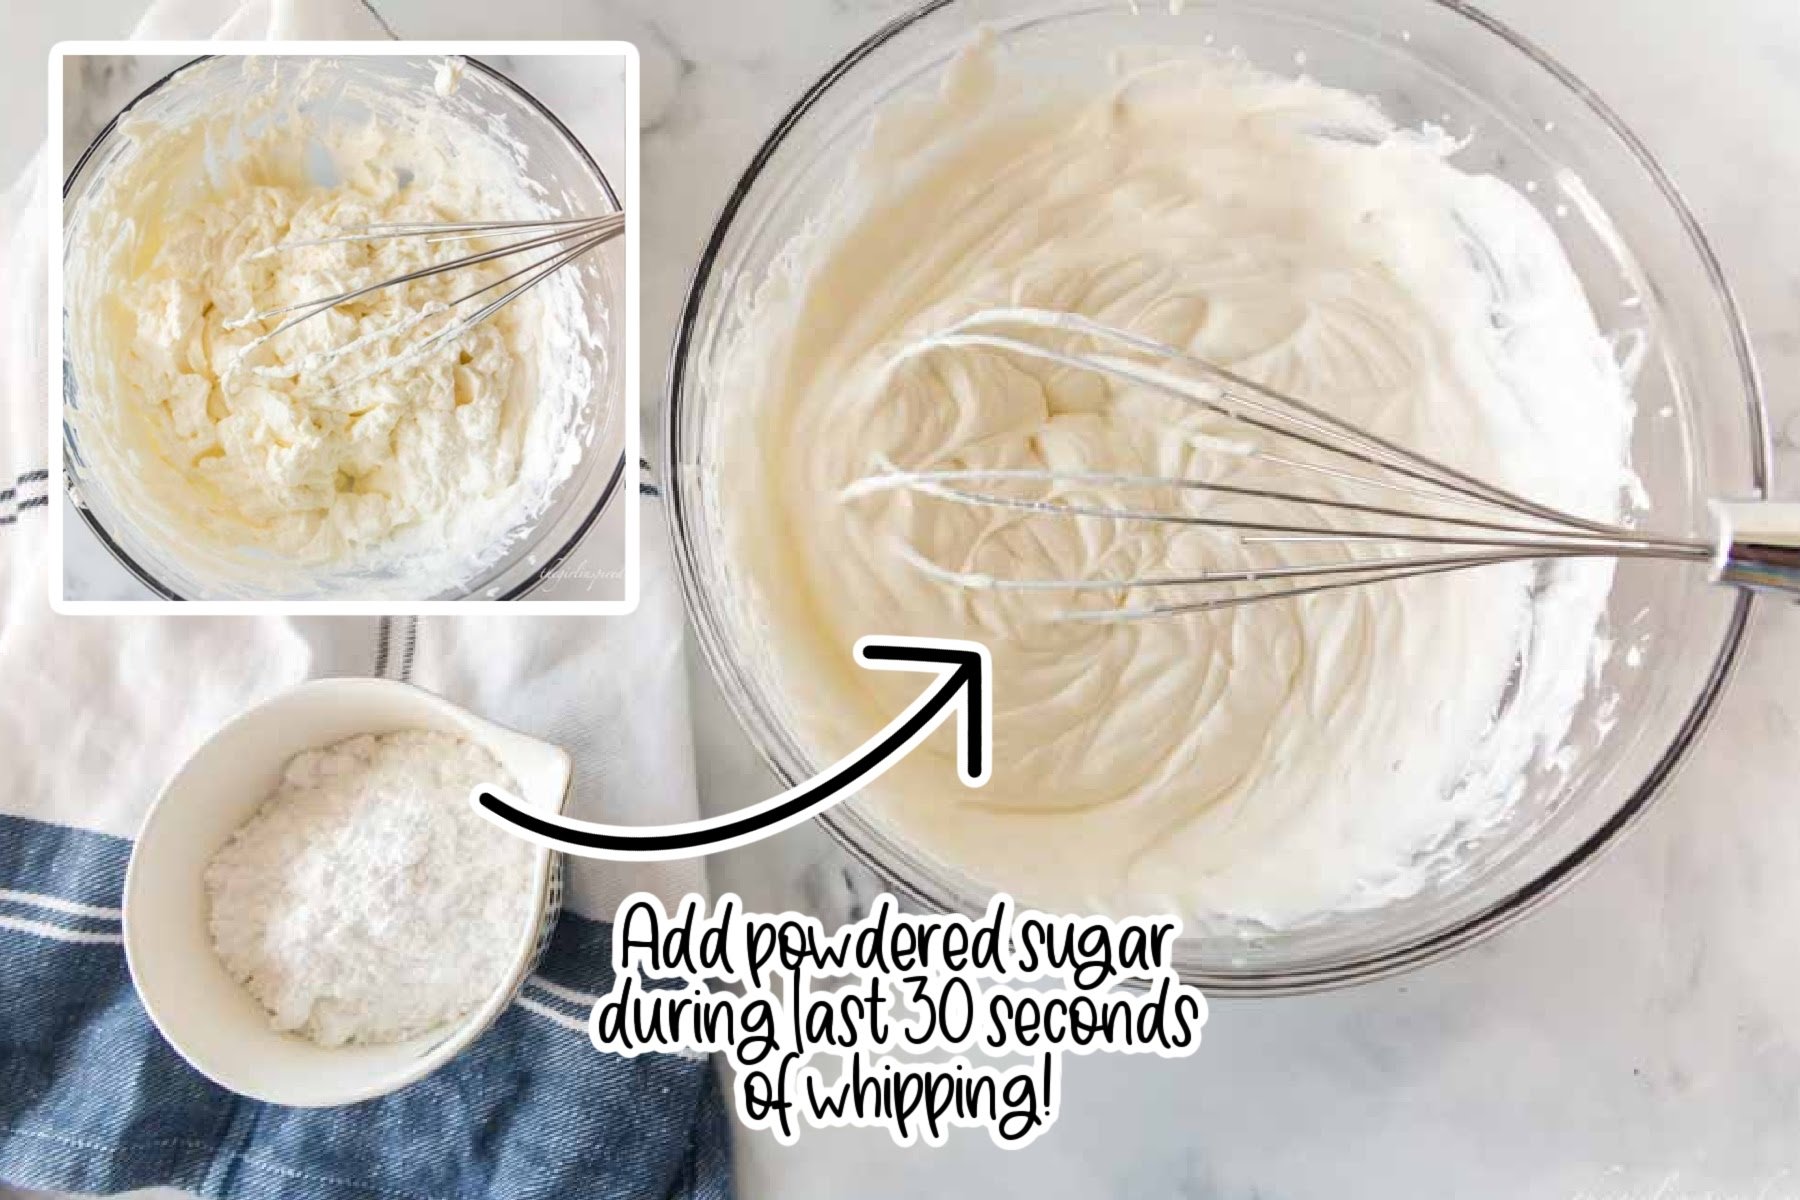 Whipping heavy cream and adding powdered sugar with text "add powdered sugar during last 30 seconds of whipping."